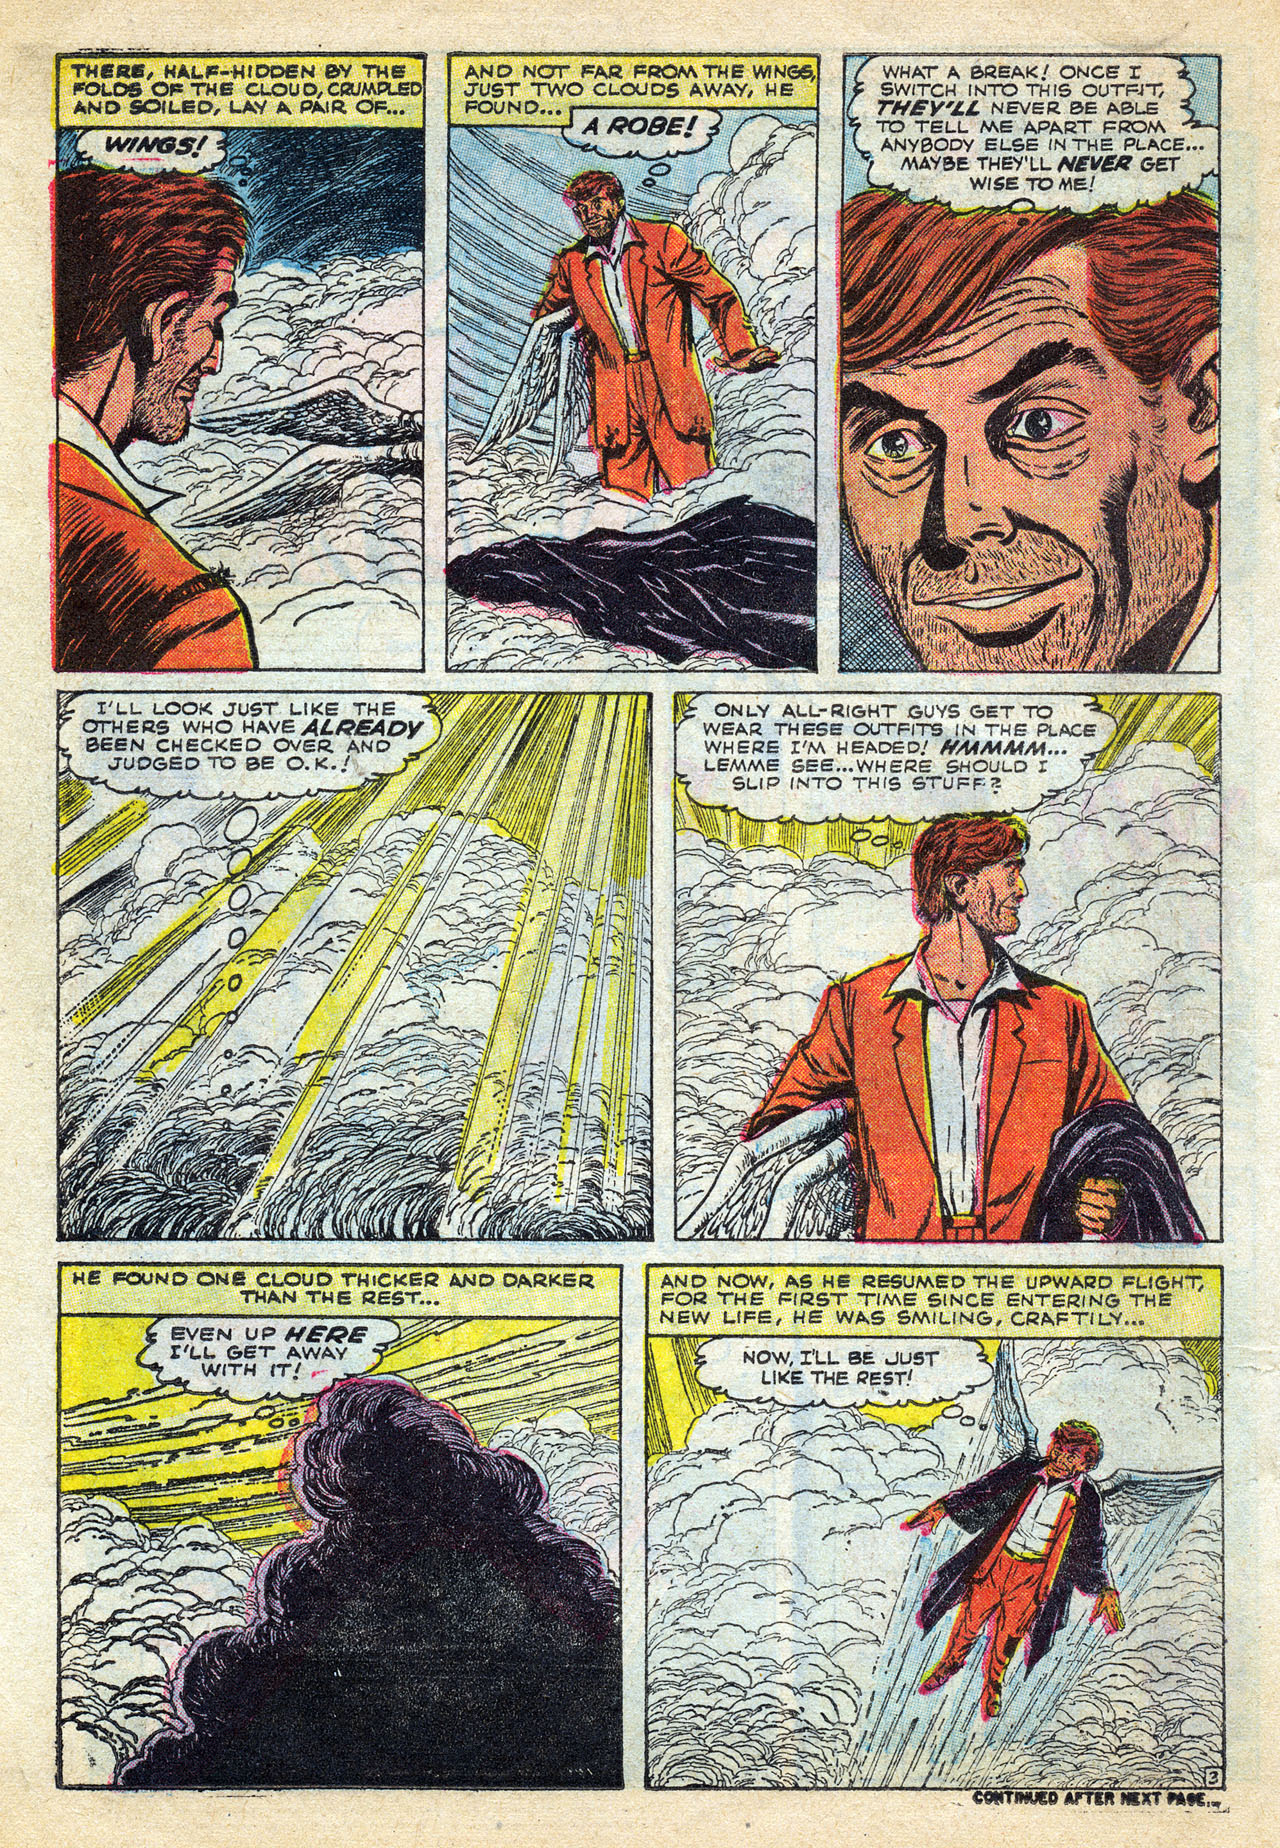 Marvel Tales (1949) 140 Page 17